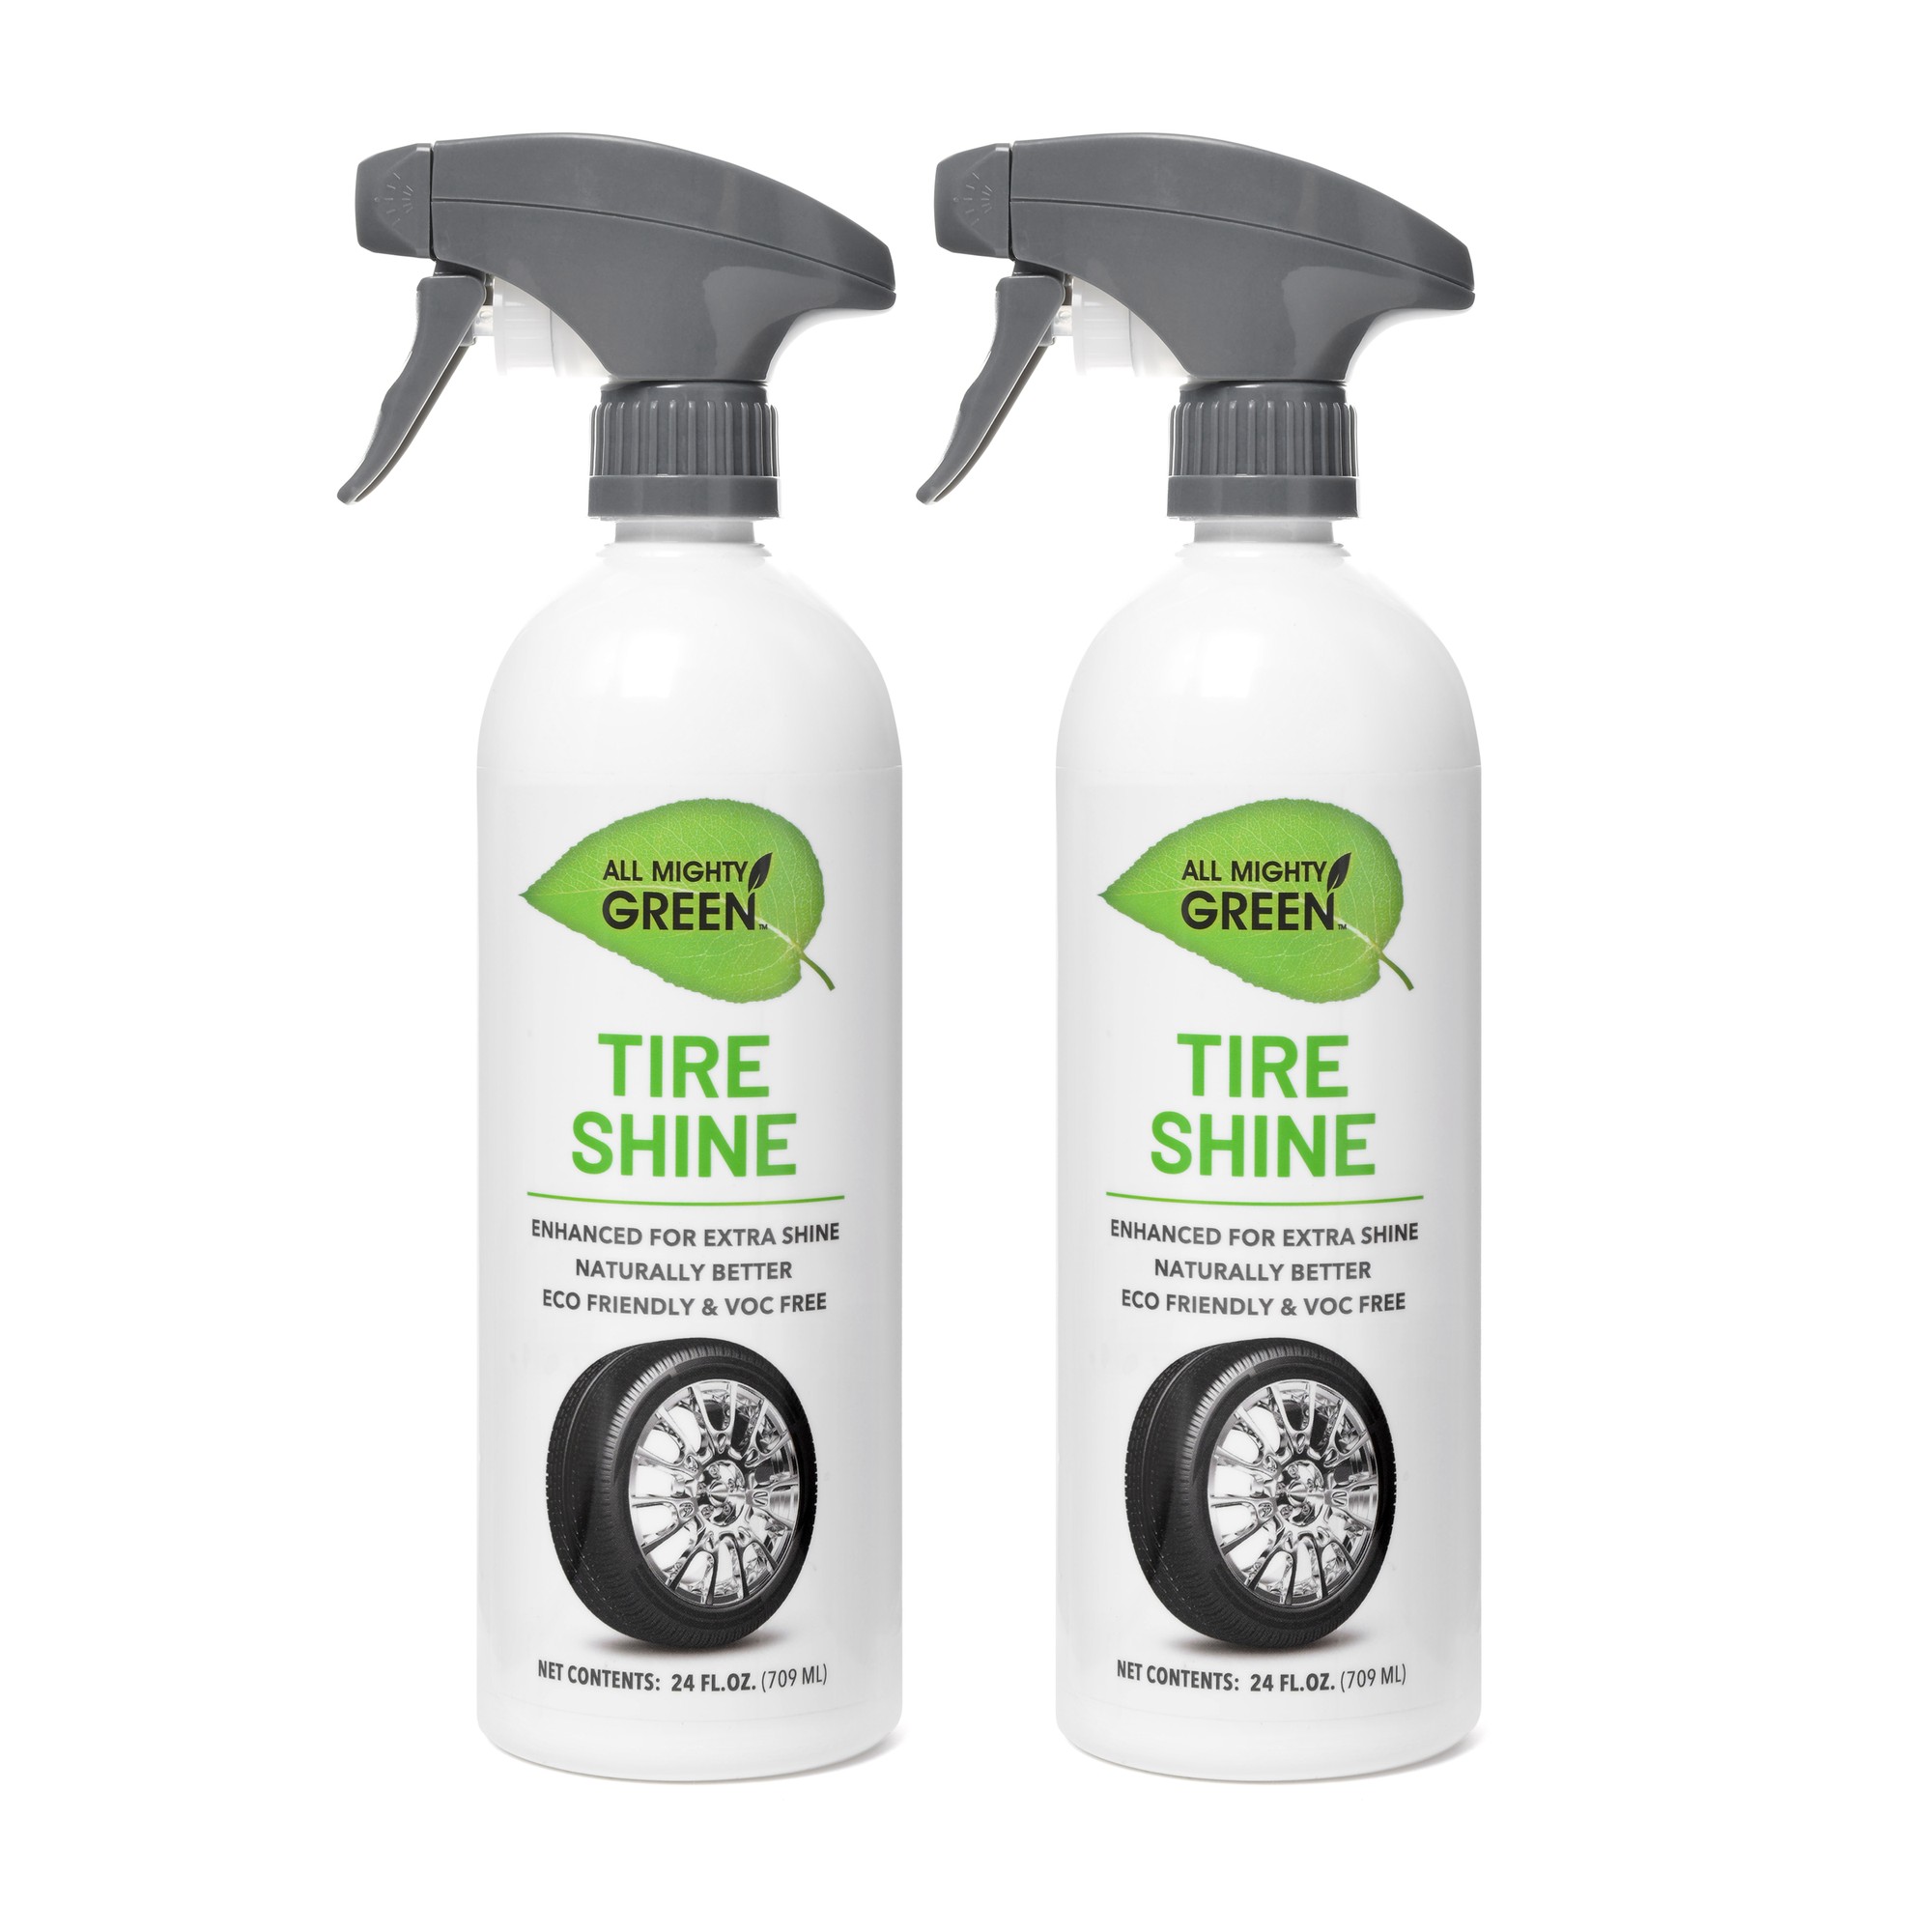 ALL MIGHTY GREEN Tire Shine